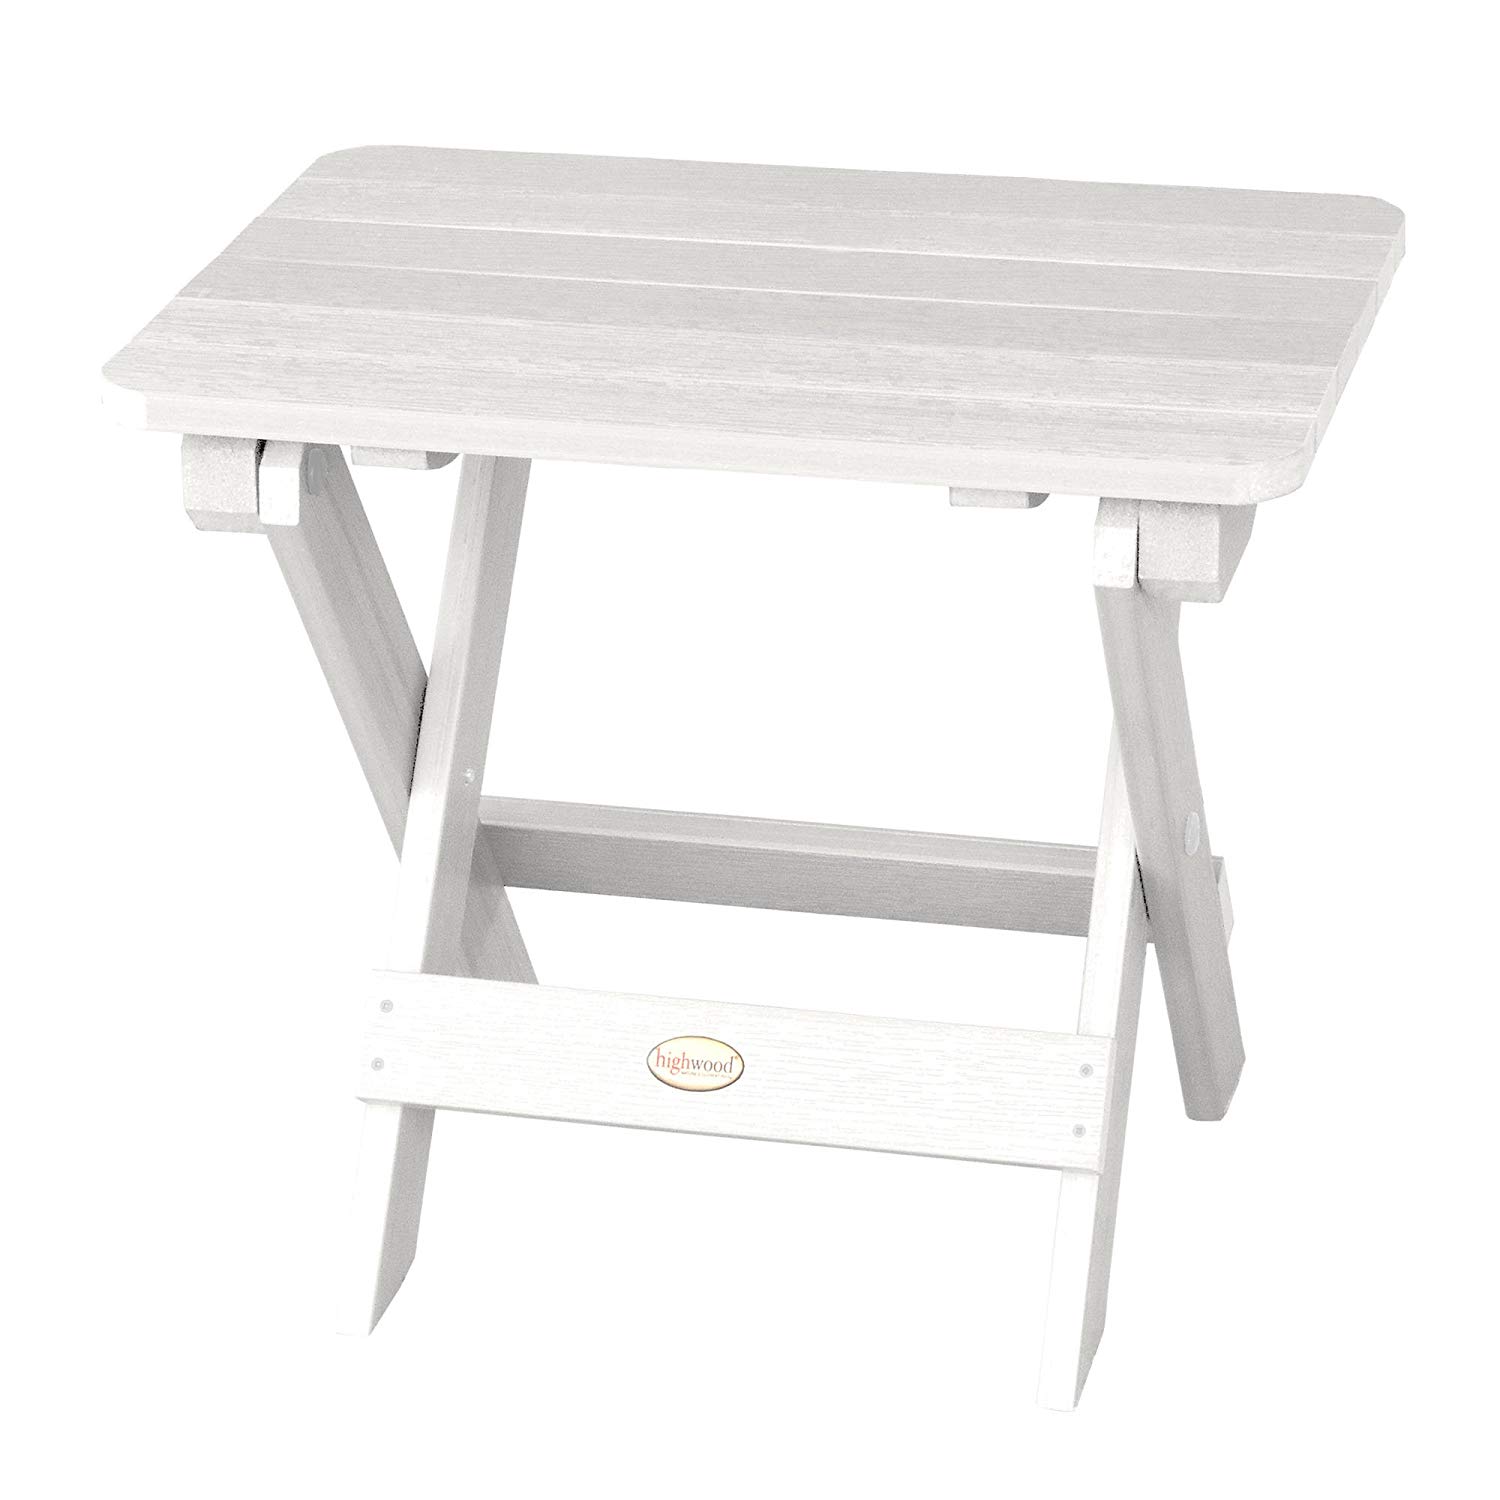 highwood folding adirondack side table white patio outdoor tables garden sofa height ikea seaside lamps hanging couch dining target furniture for less rattan set small thin coffee